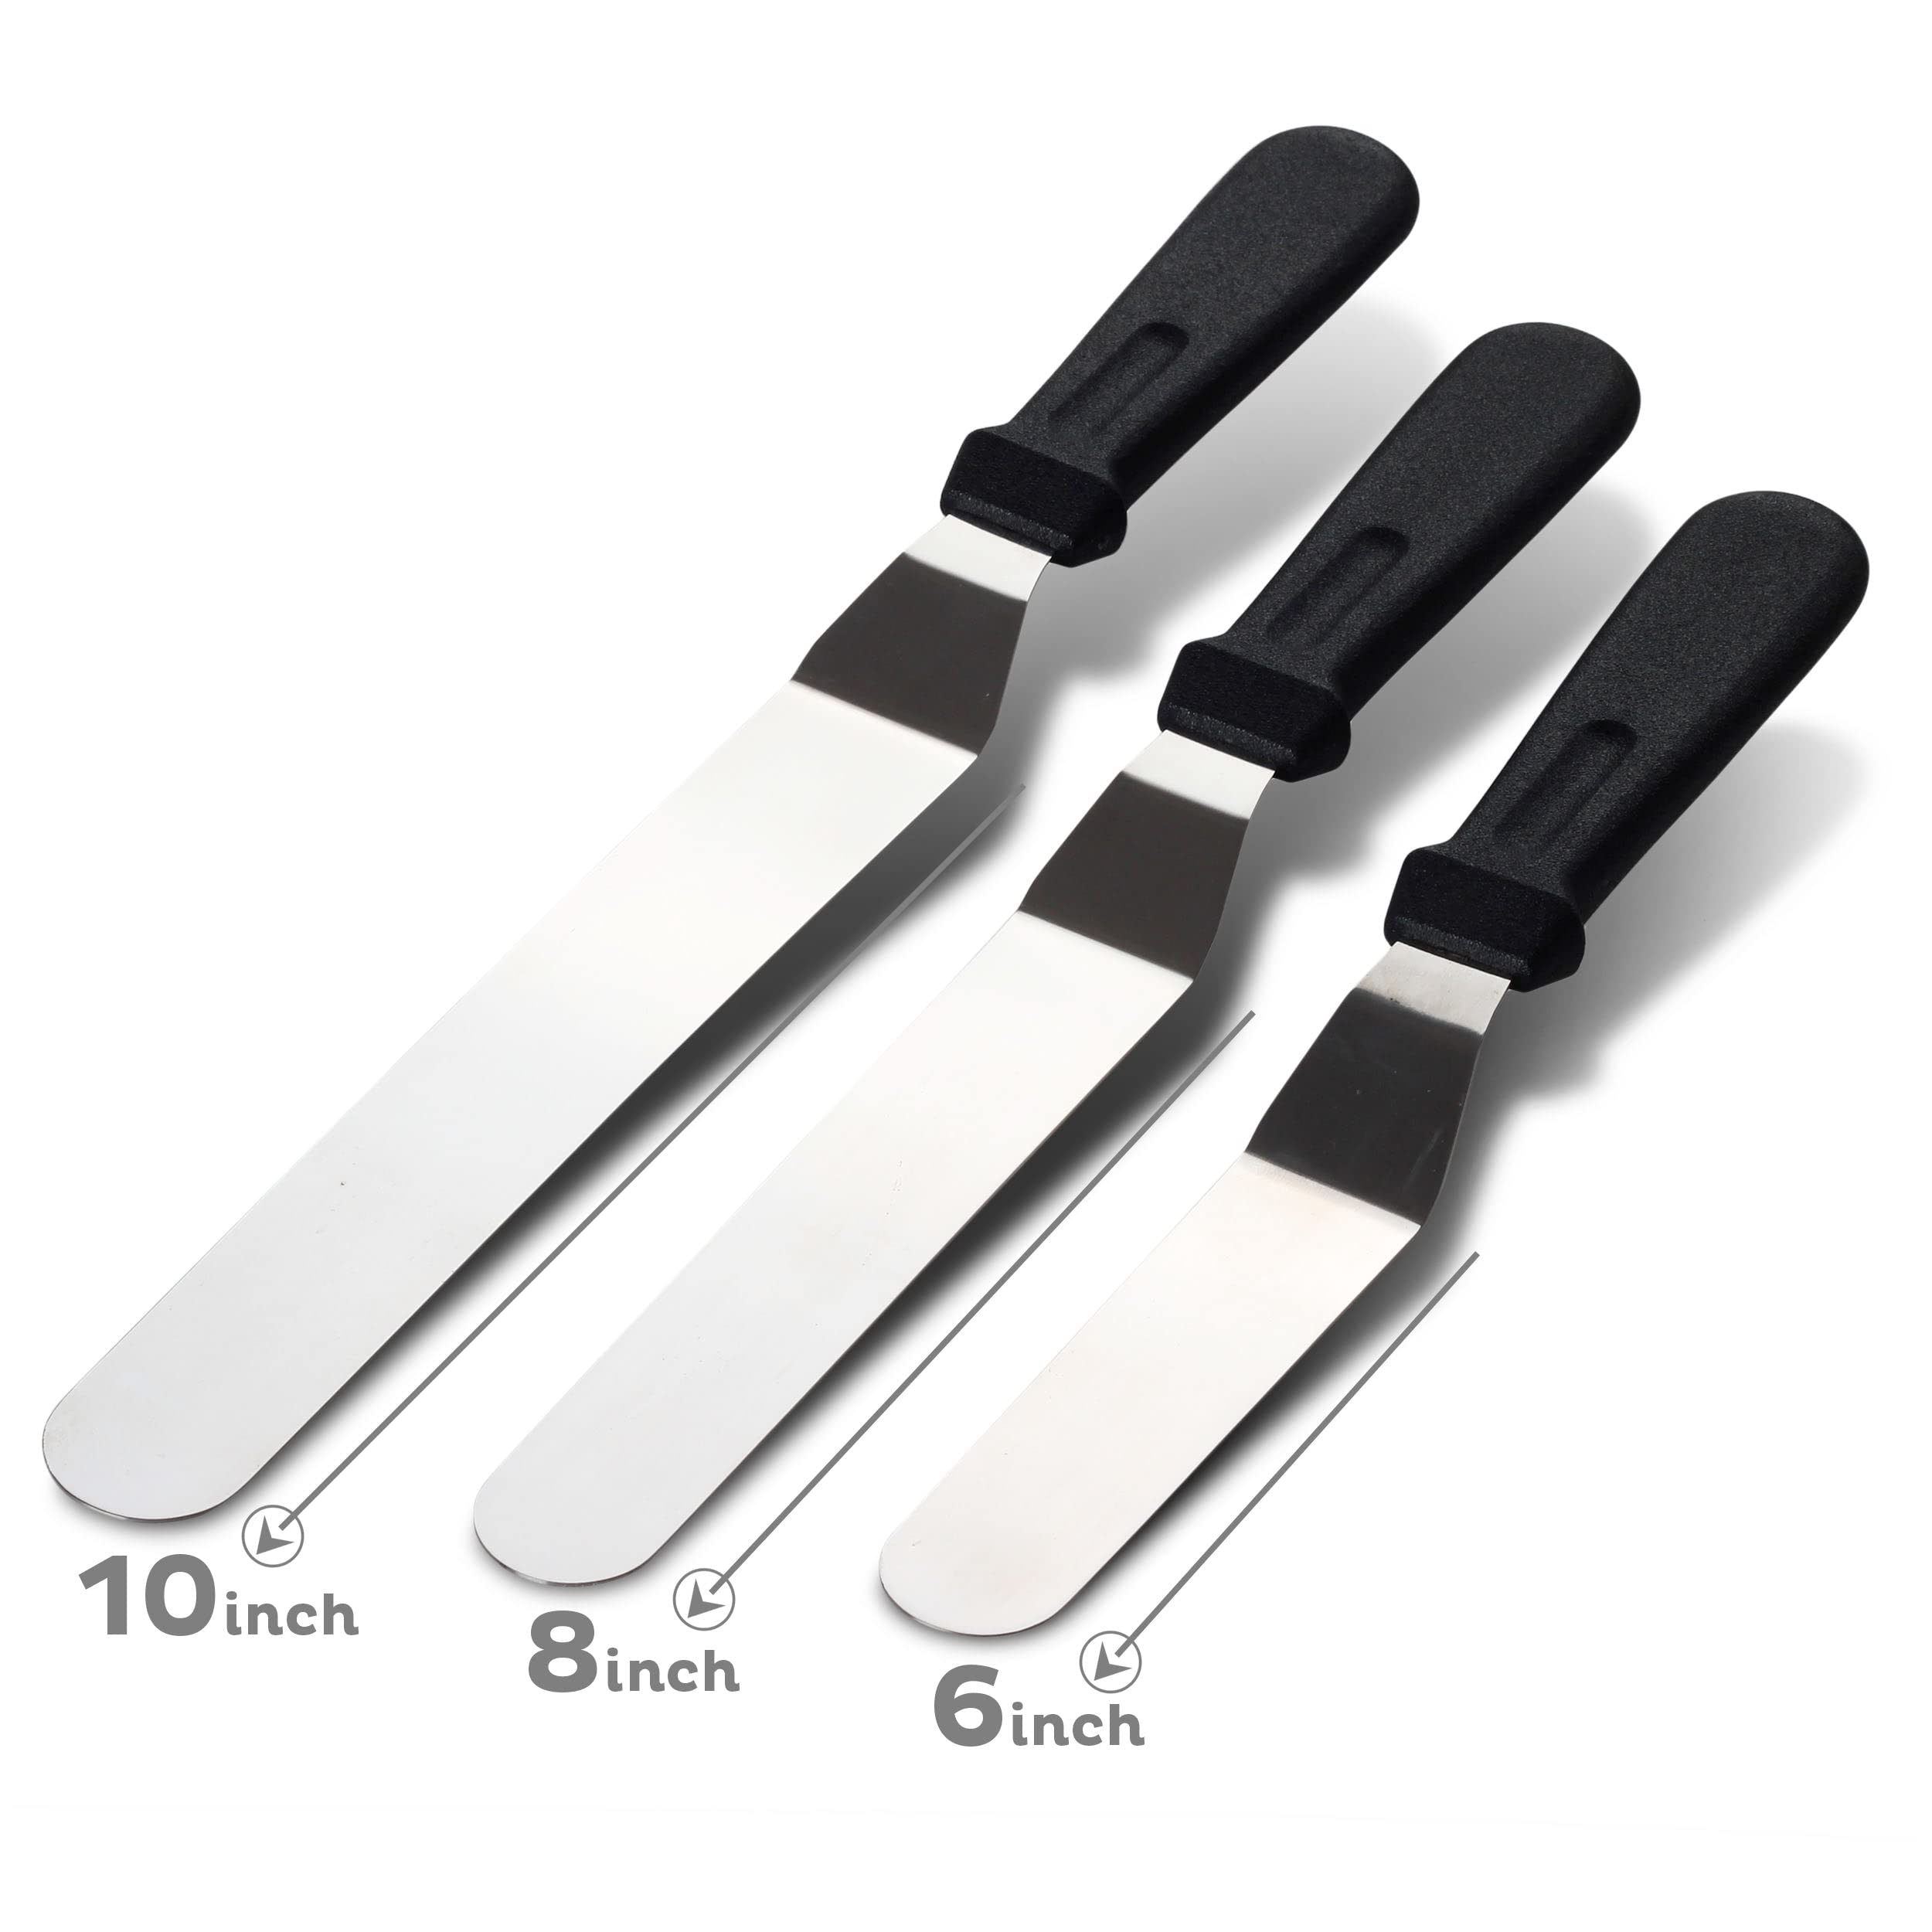 Orblue Angled Metal Icing Spatula 3-Pack